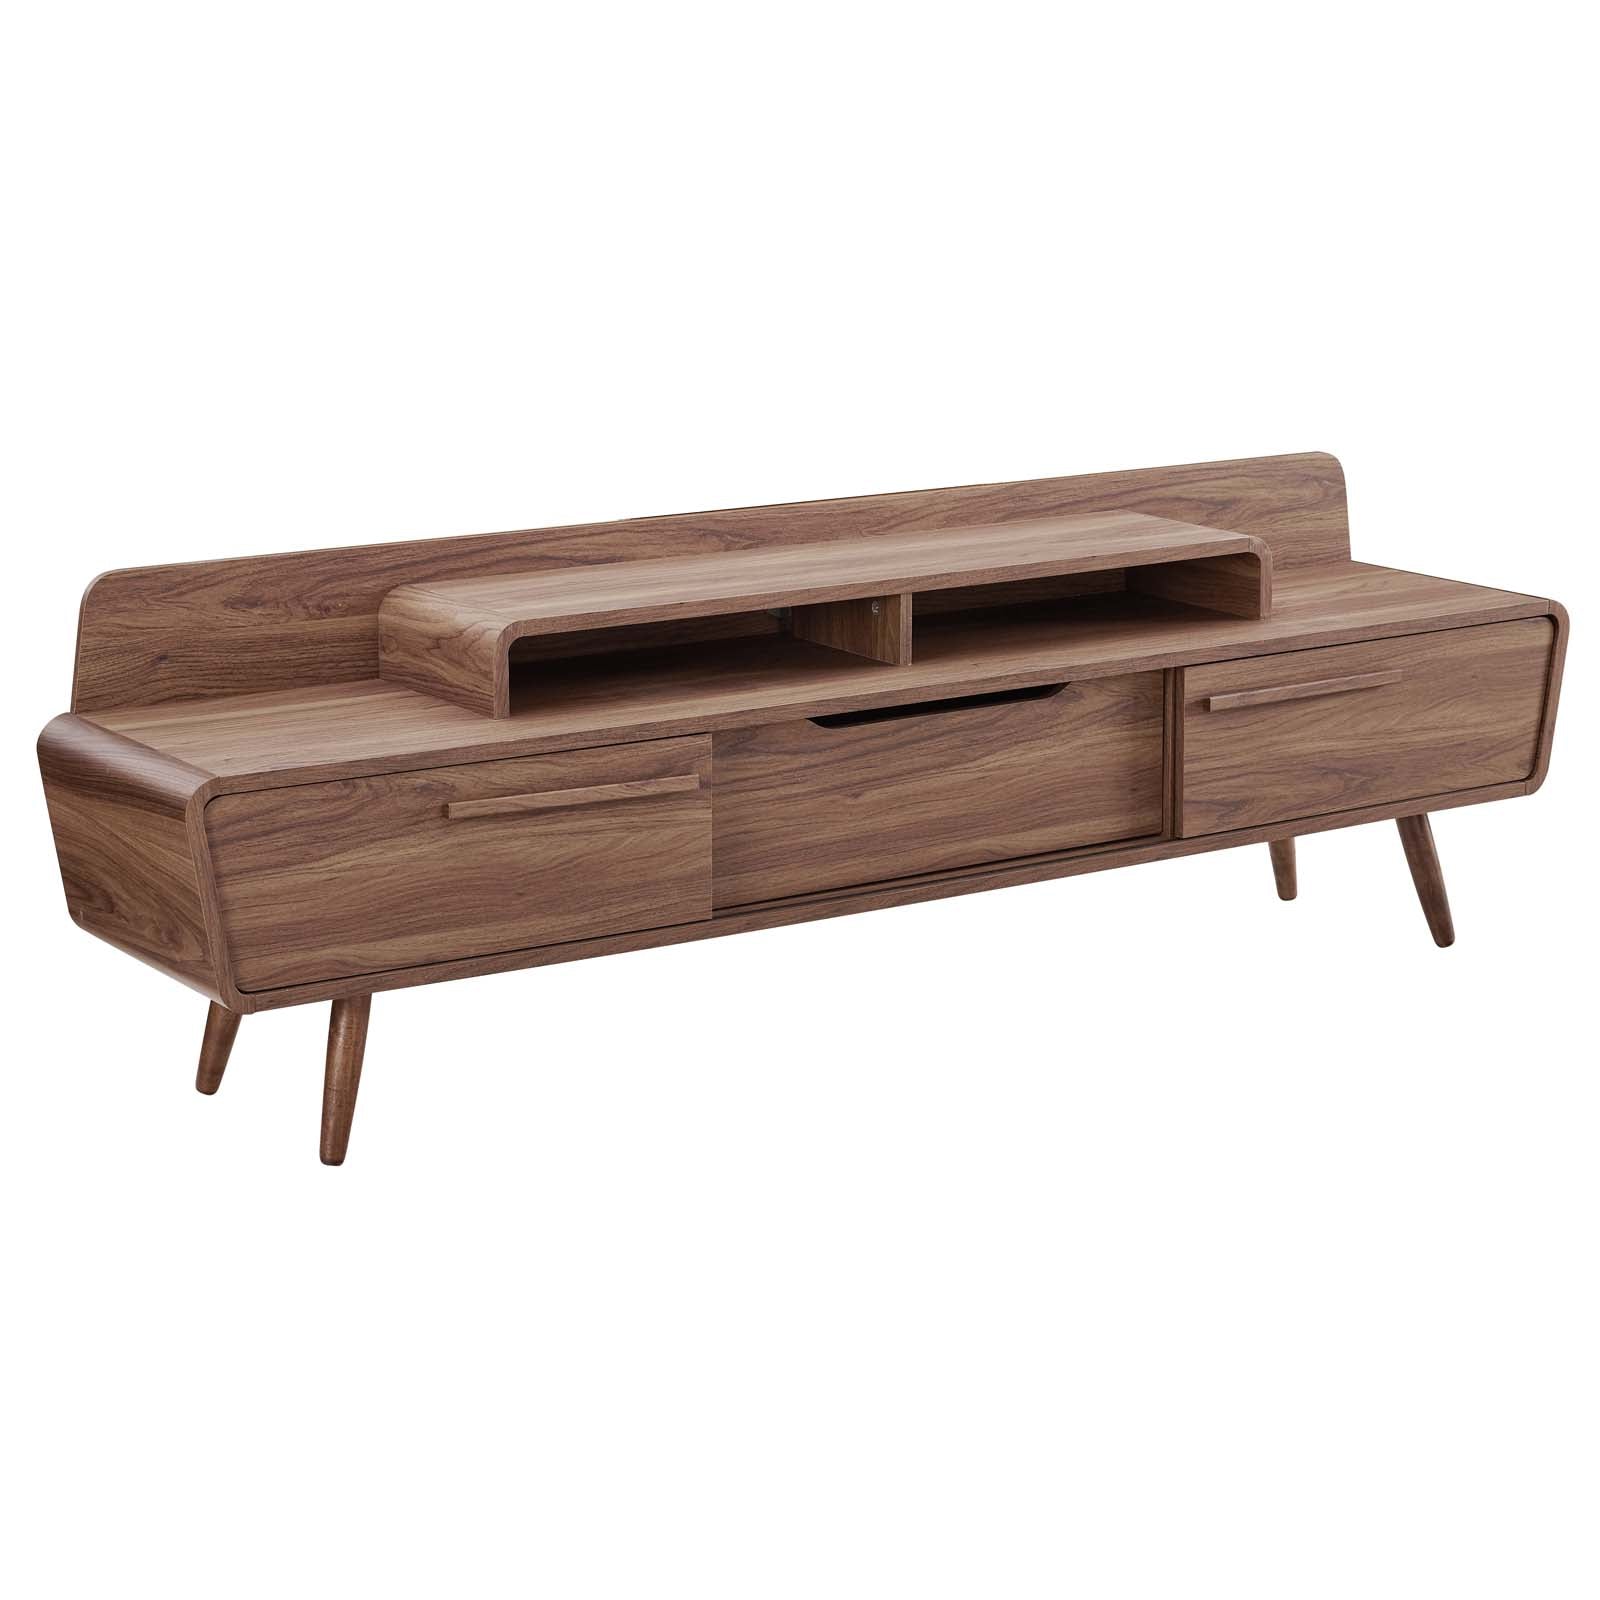 Omnistand 74" TV Stand - East Shore Modern Home Furnishings